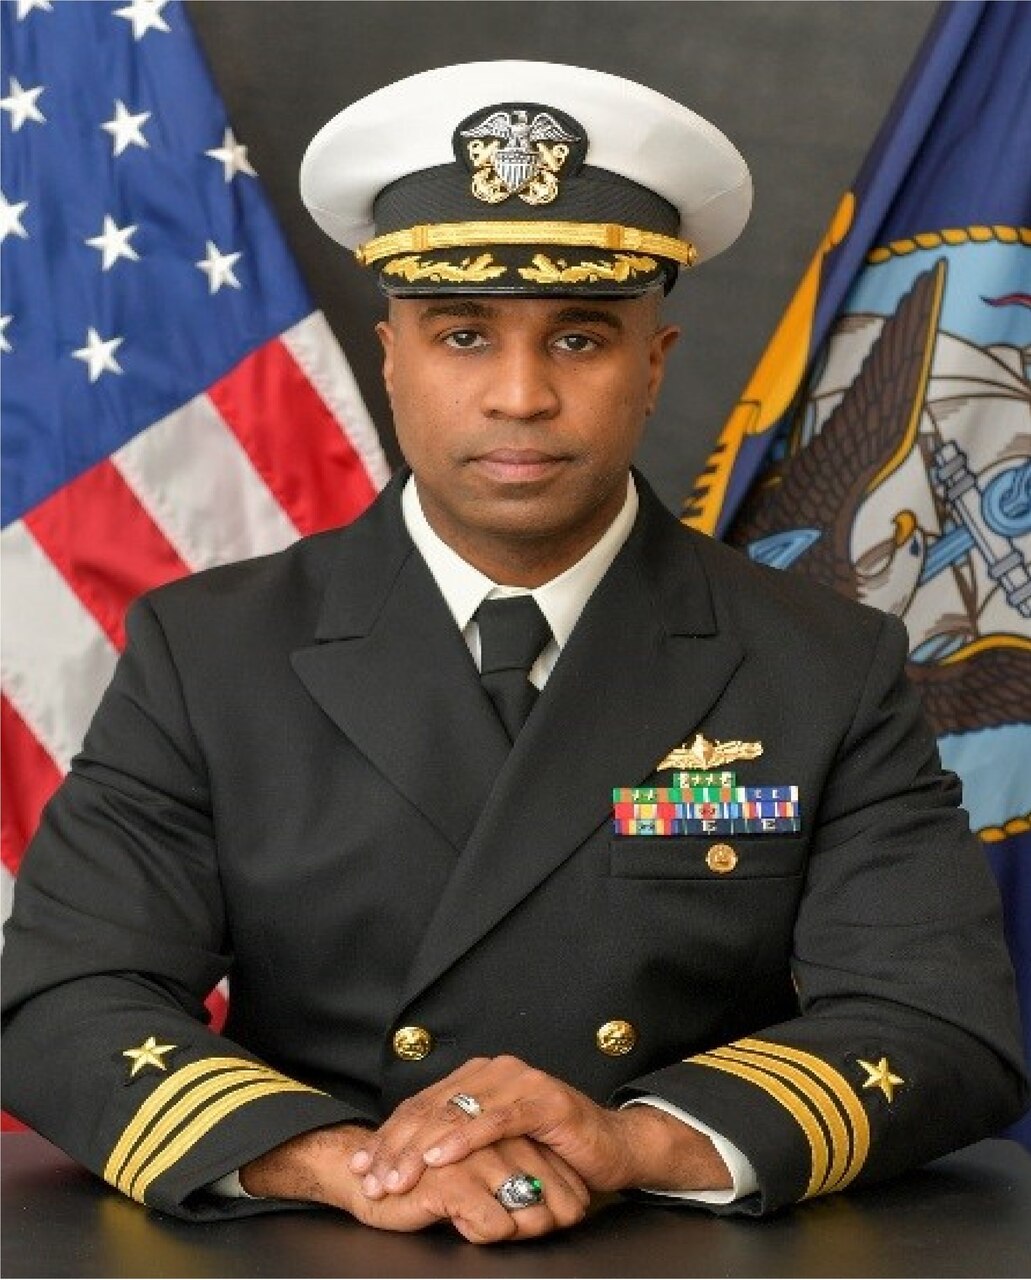 Commander Guillermo “Jerry” Howell